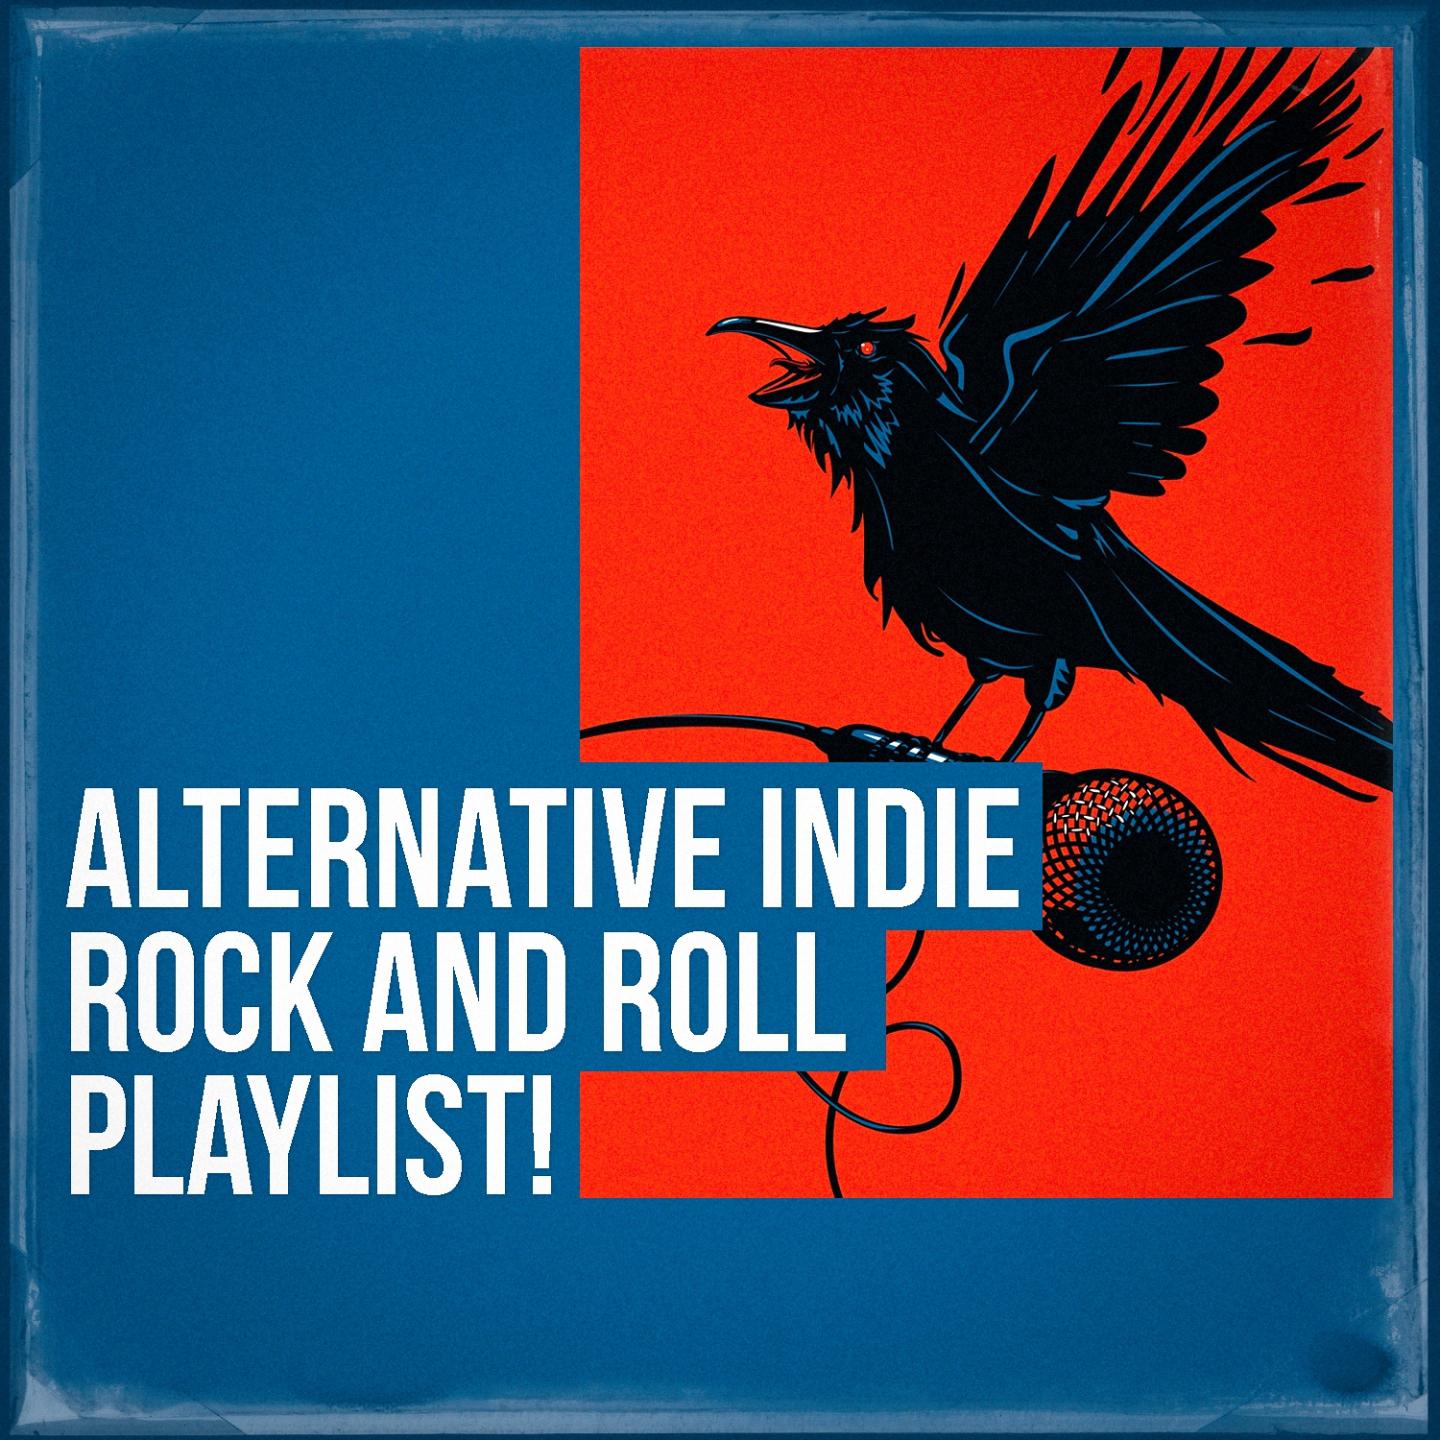 Alternative Indie Rock and Roll Playlist!